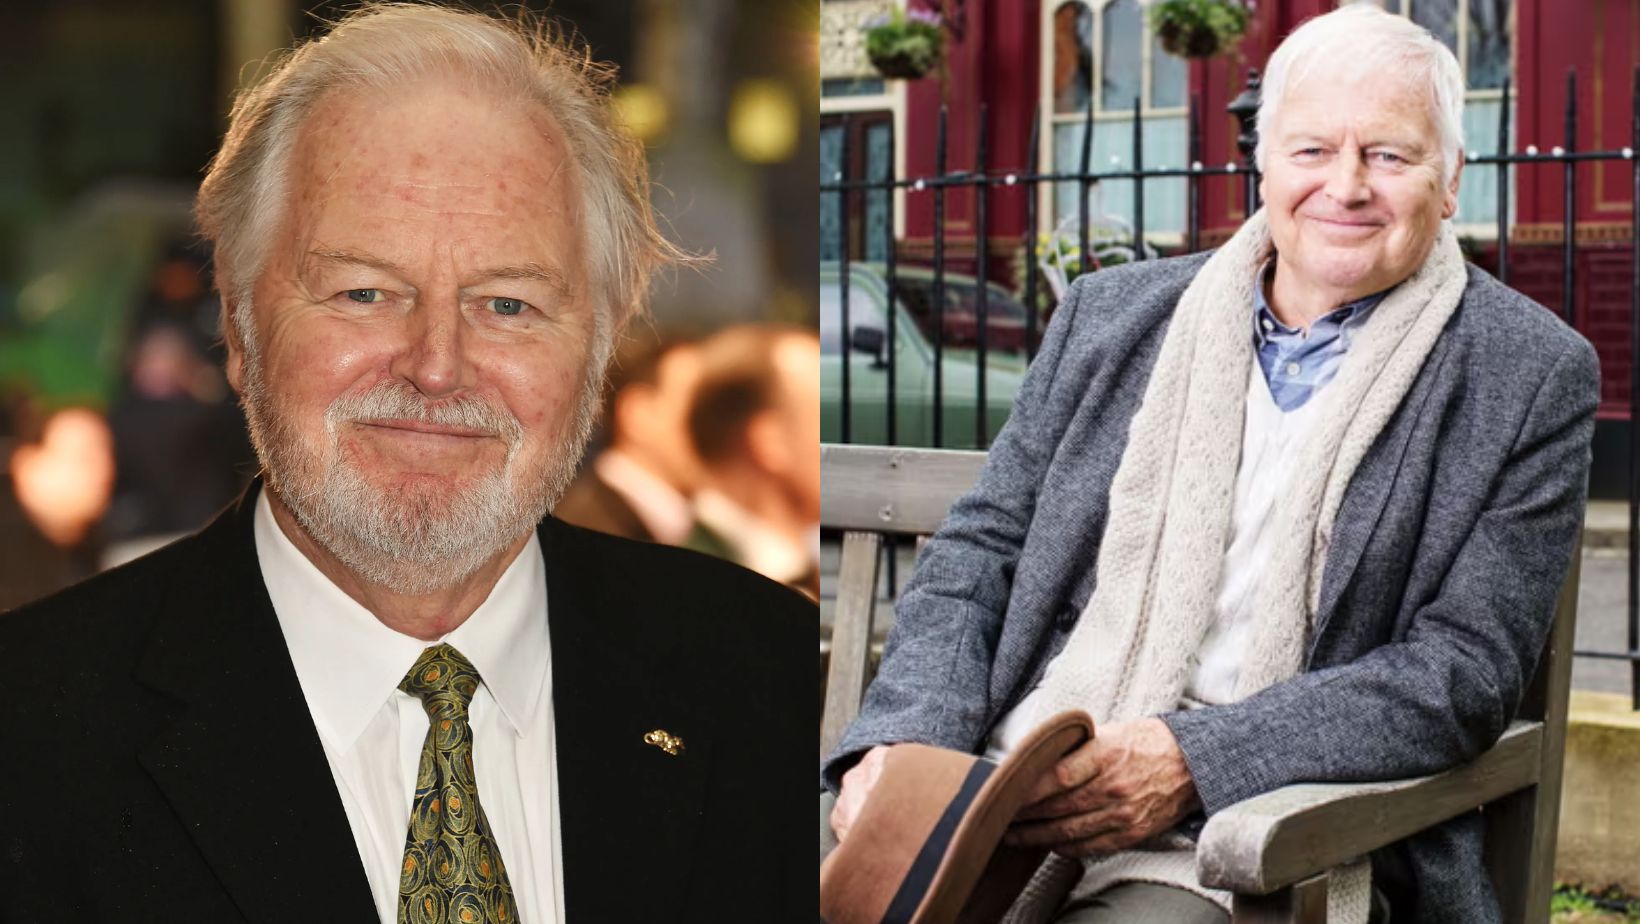 Ian Lavender Cause of Death and Illness